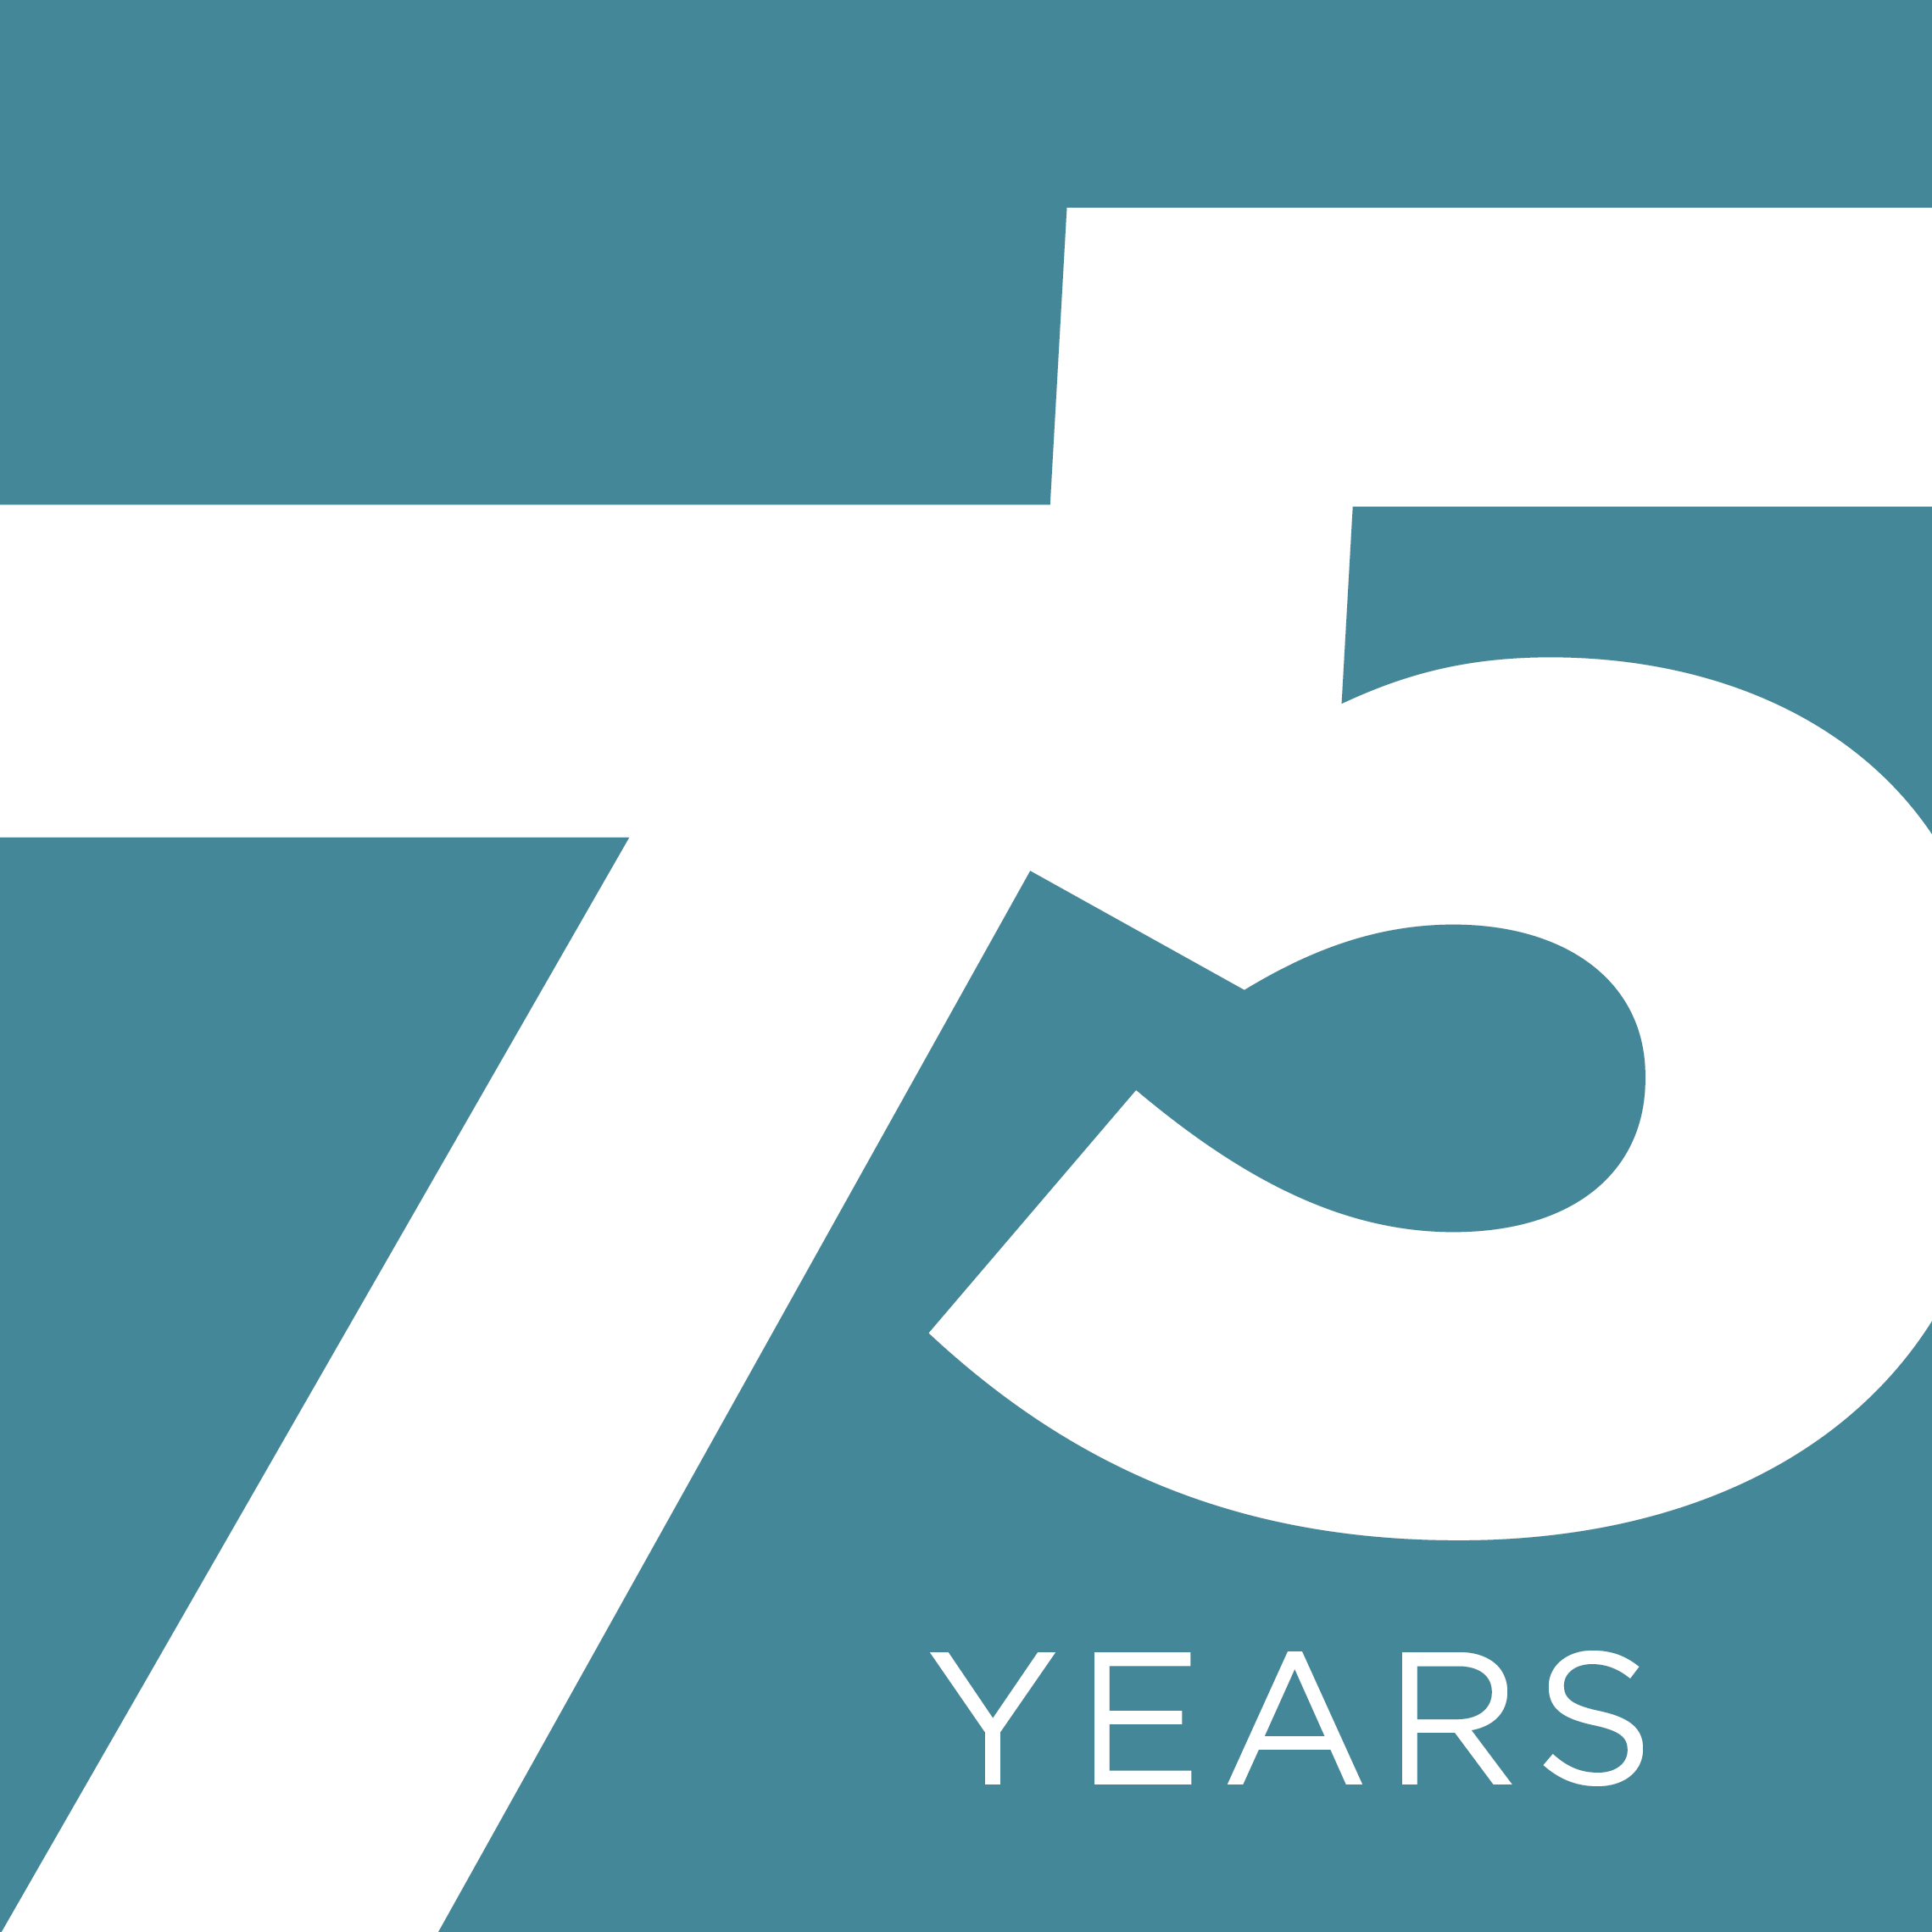 75 Years and Counting!